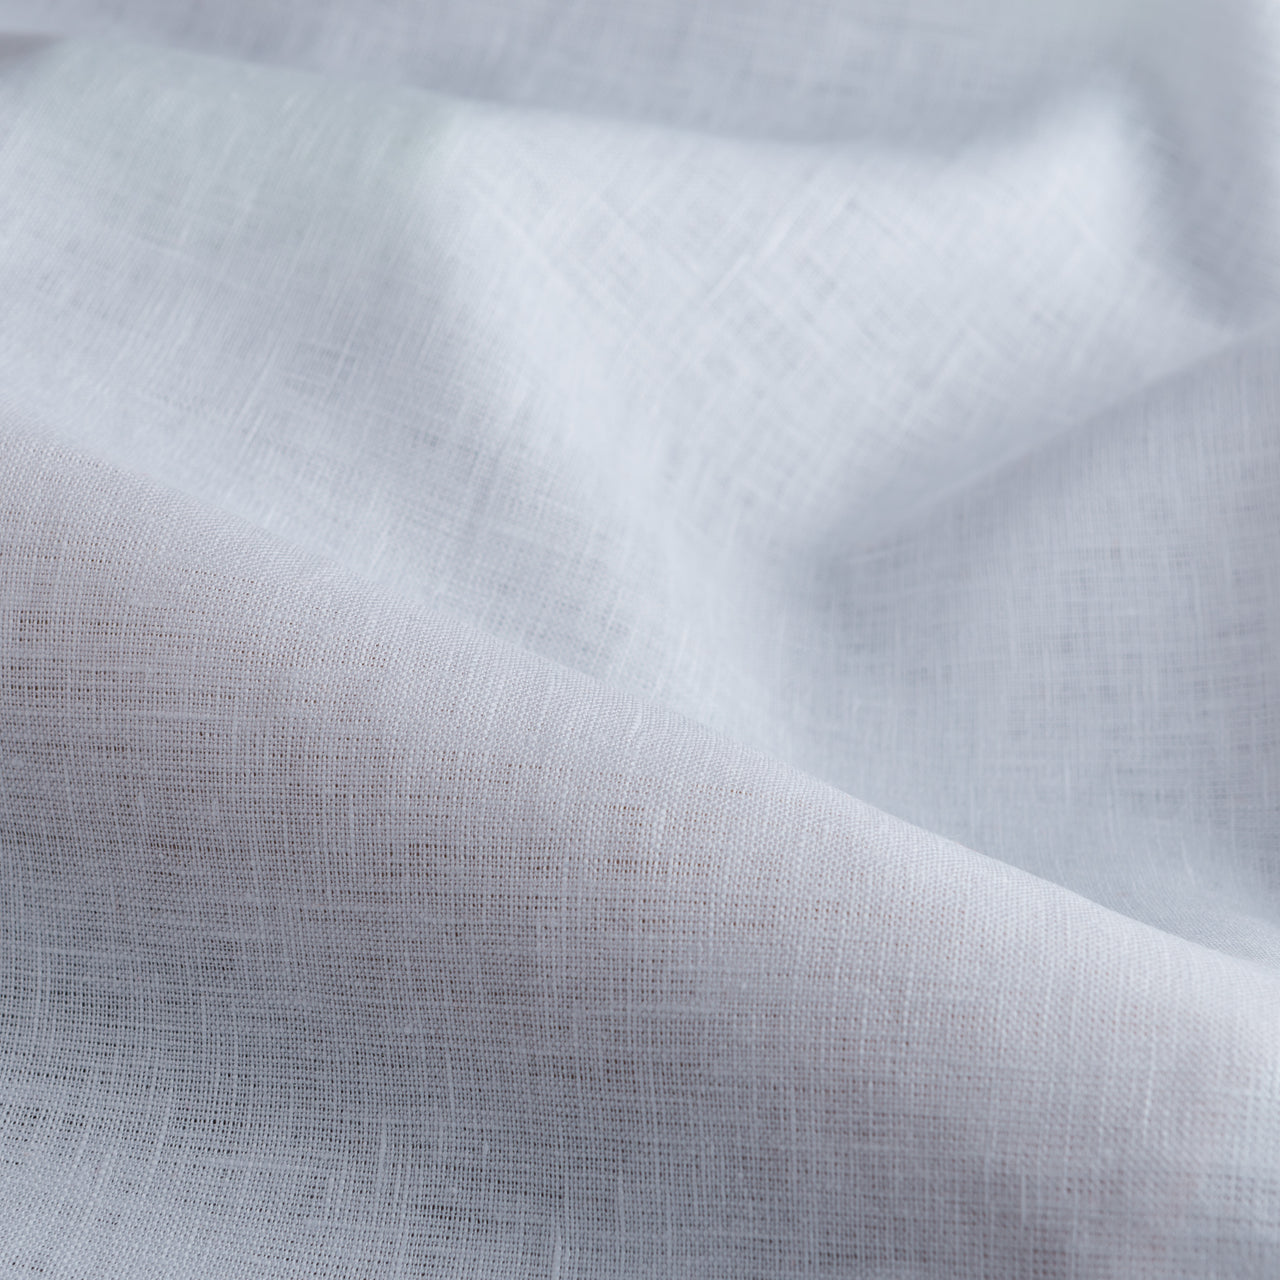 White Medium Weight Linen Fabric by the Meter - 100% French Natural - Width 133 cm, 168 cm